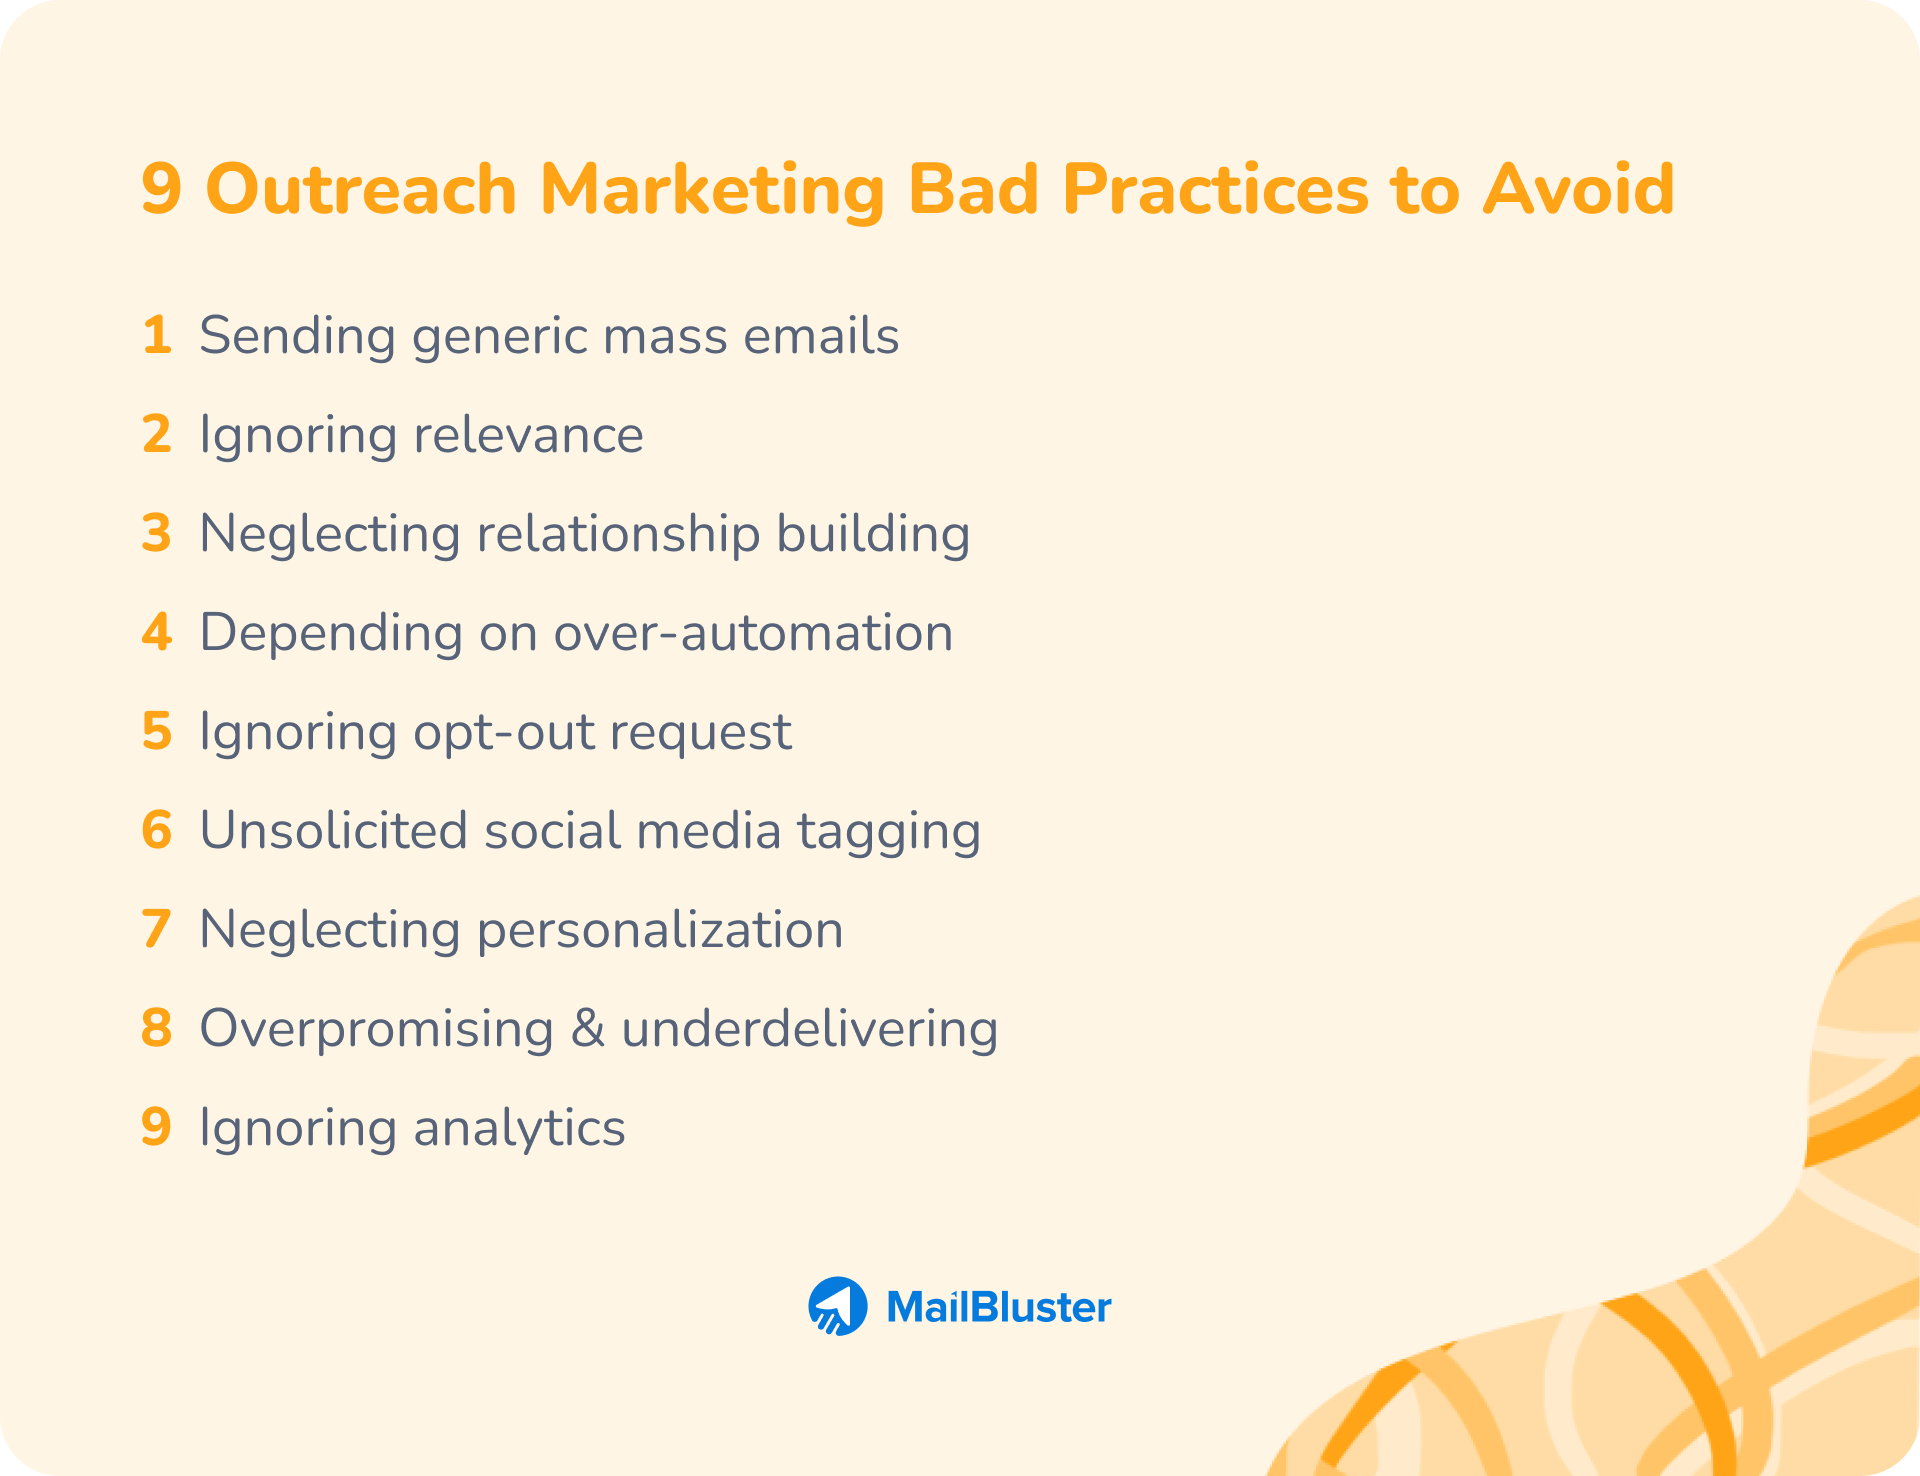 Outreach marketing bad practices you should avoid